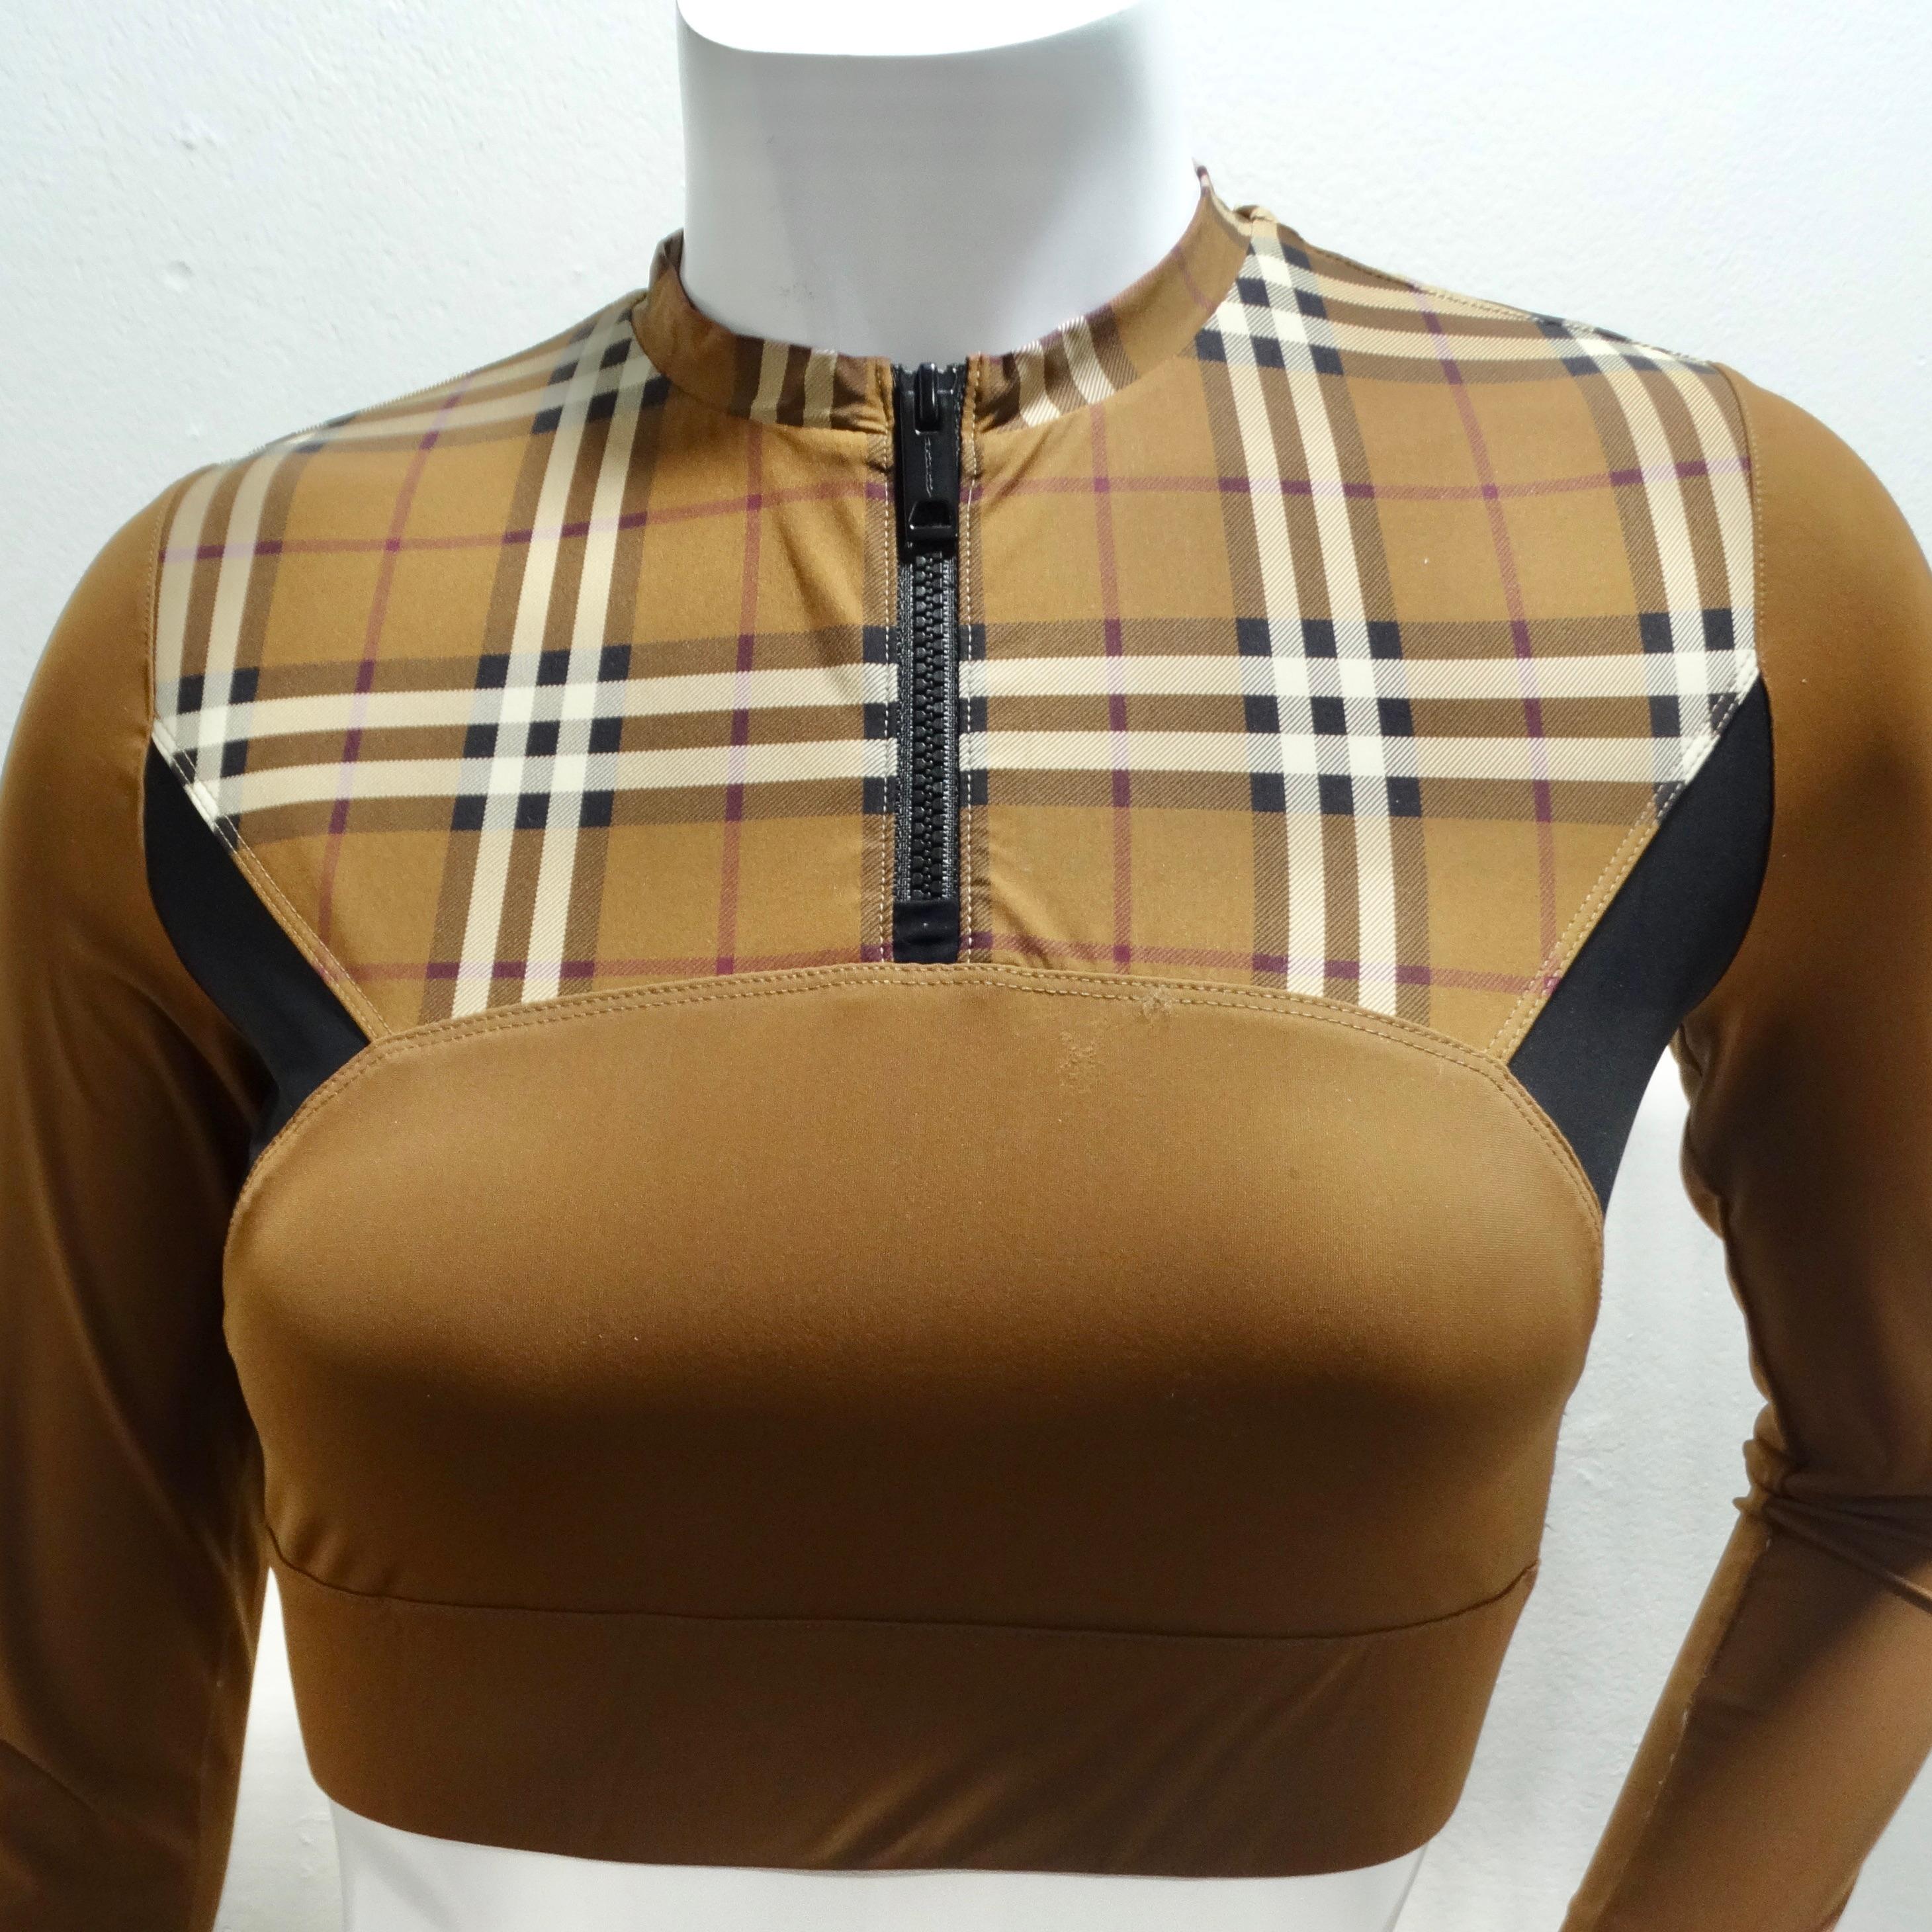 Introducing the Burberry Everley Check Sporty Top – a versatile and stylish addition to your wardrobe that seamlessly transitions from workout wear to chic casual attire. Crafted in a light brown hue, this long sleeve cropped top is designed for